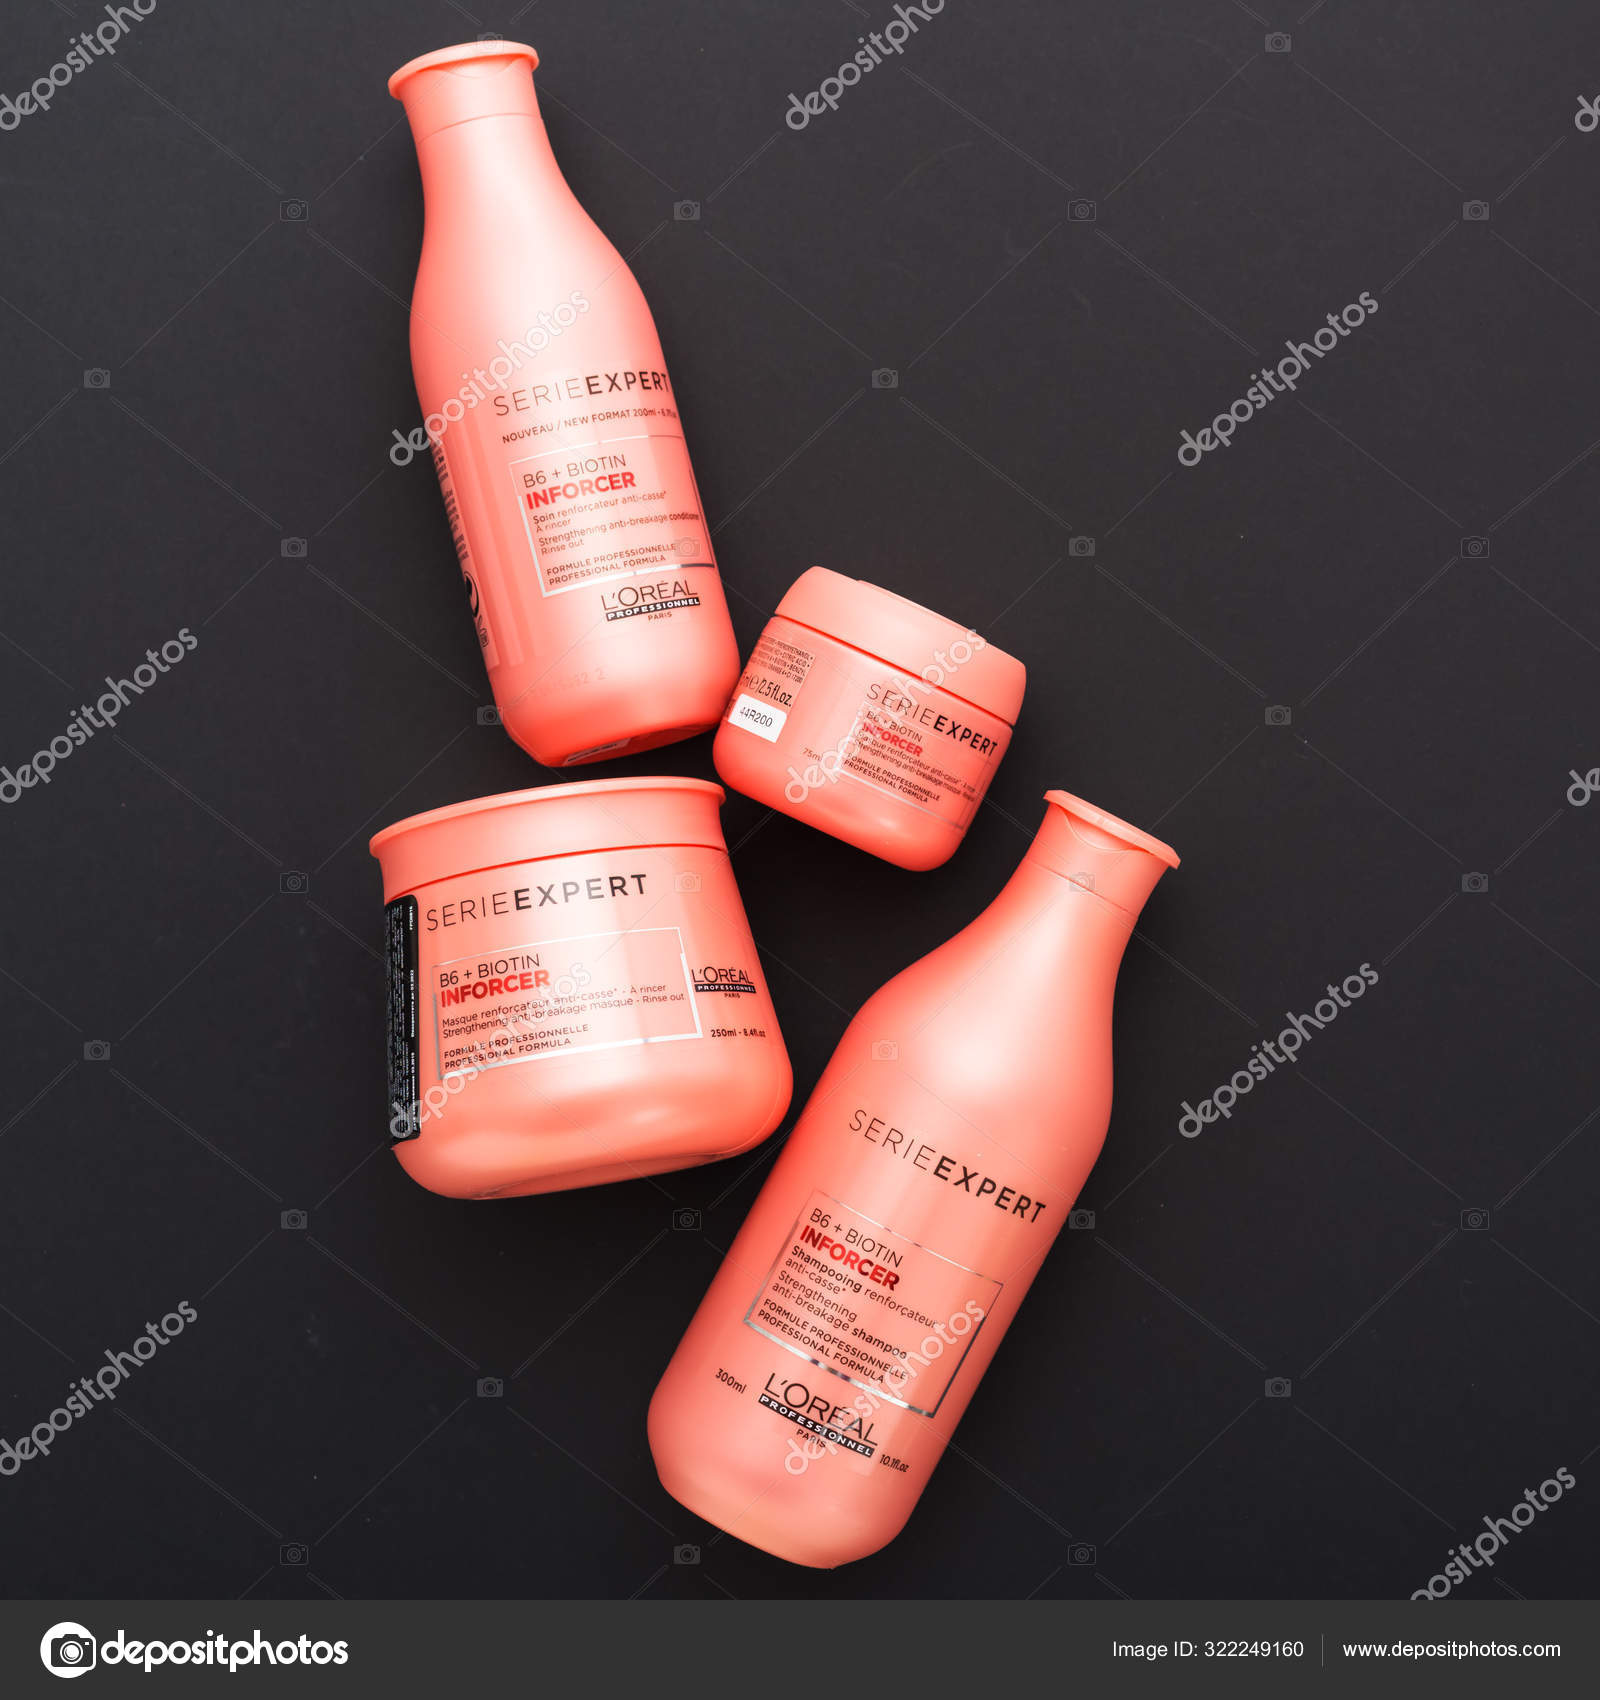 Plenarmøde En begivenhed Modsigelse L'oreal professionnel Paris Serie Expert Inforcer hair professional  products. Loreal shampoo cream mask conditioner for hair. Flat lay on black  background. Pink hair cosmetics bottles. – Stock Editorial Photo ©  beton_studio #322249160